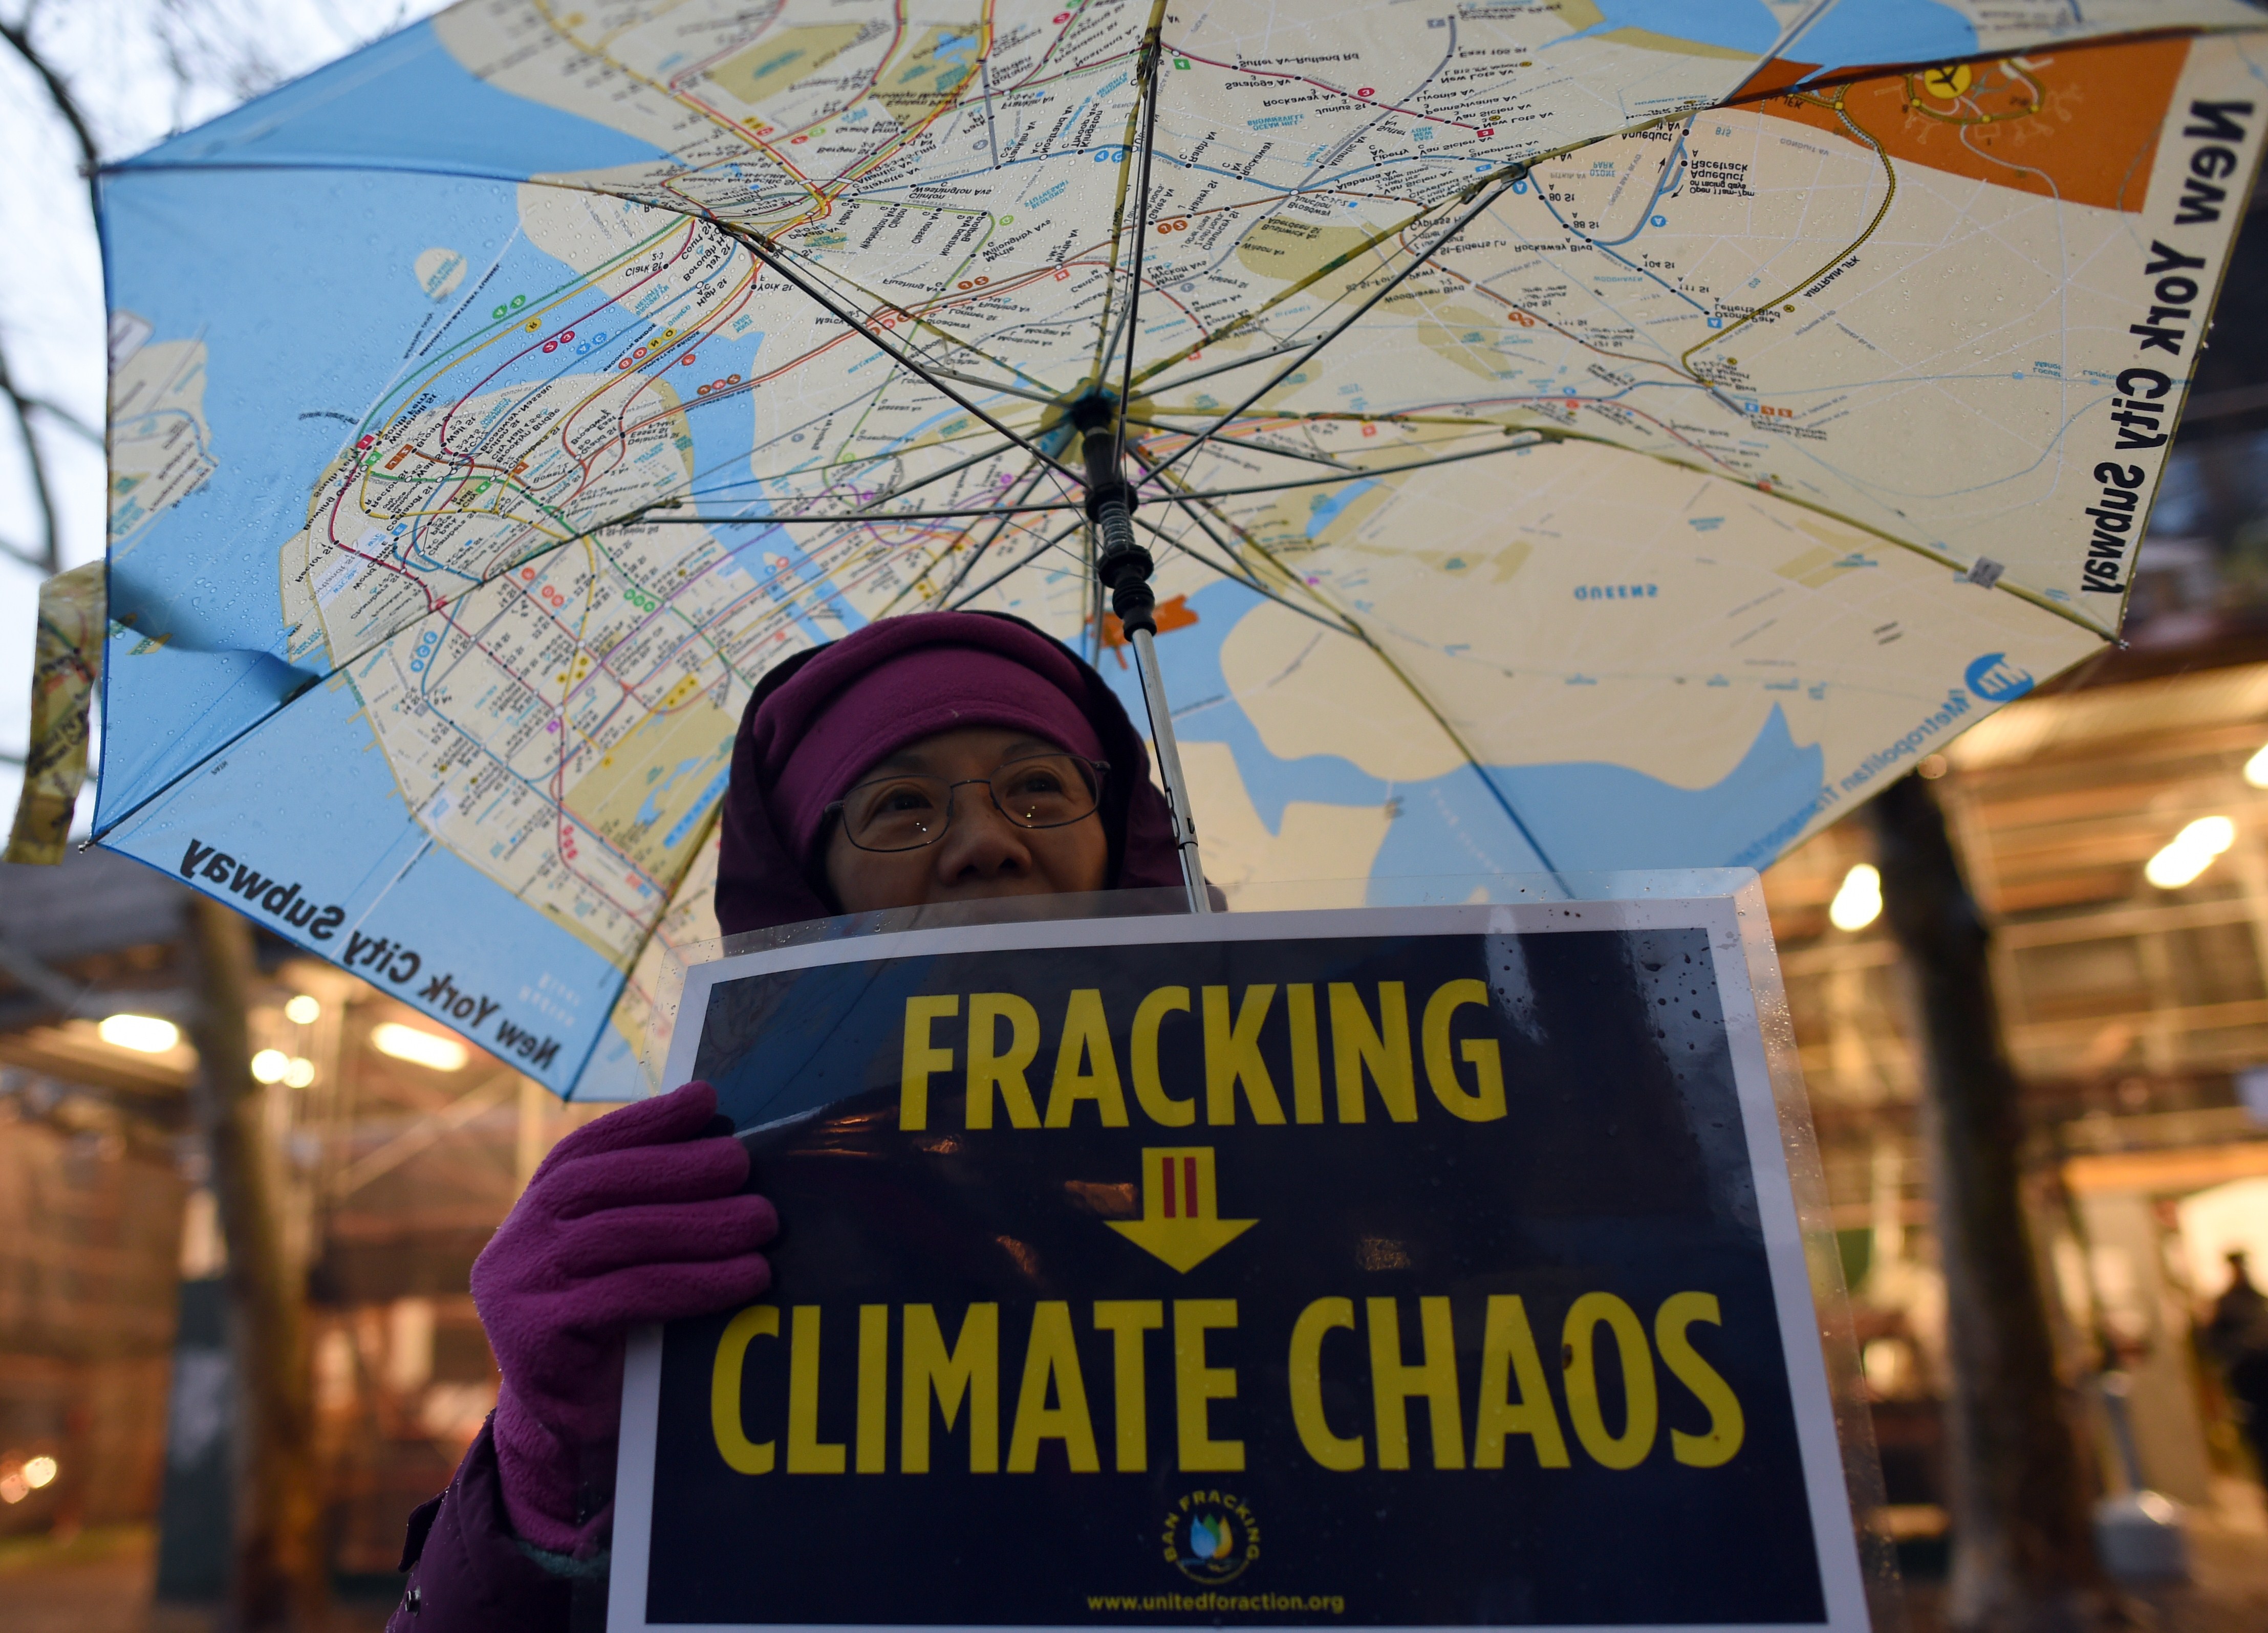 A woman holds an anti-fracking sign as a group of demonstrators gather for a rally for a Global Climate Treaty on Dec. 10, 2014 in New York City.